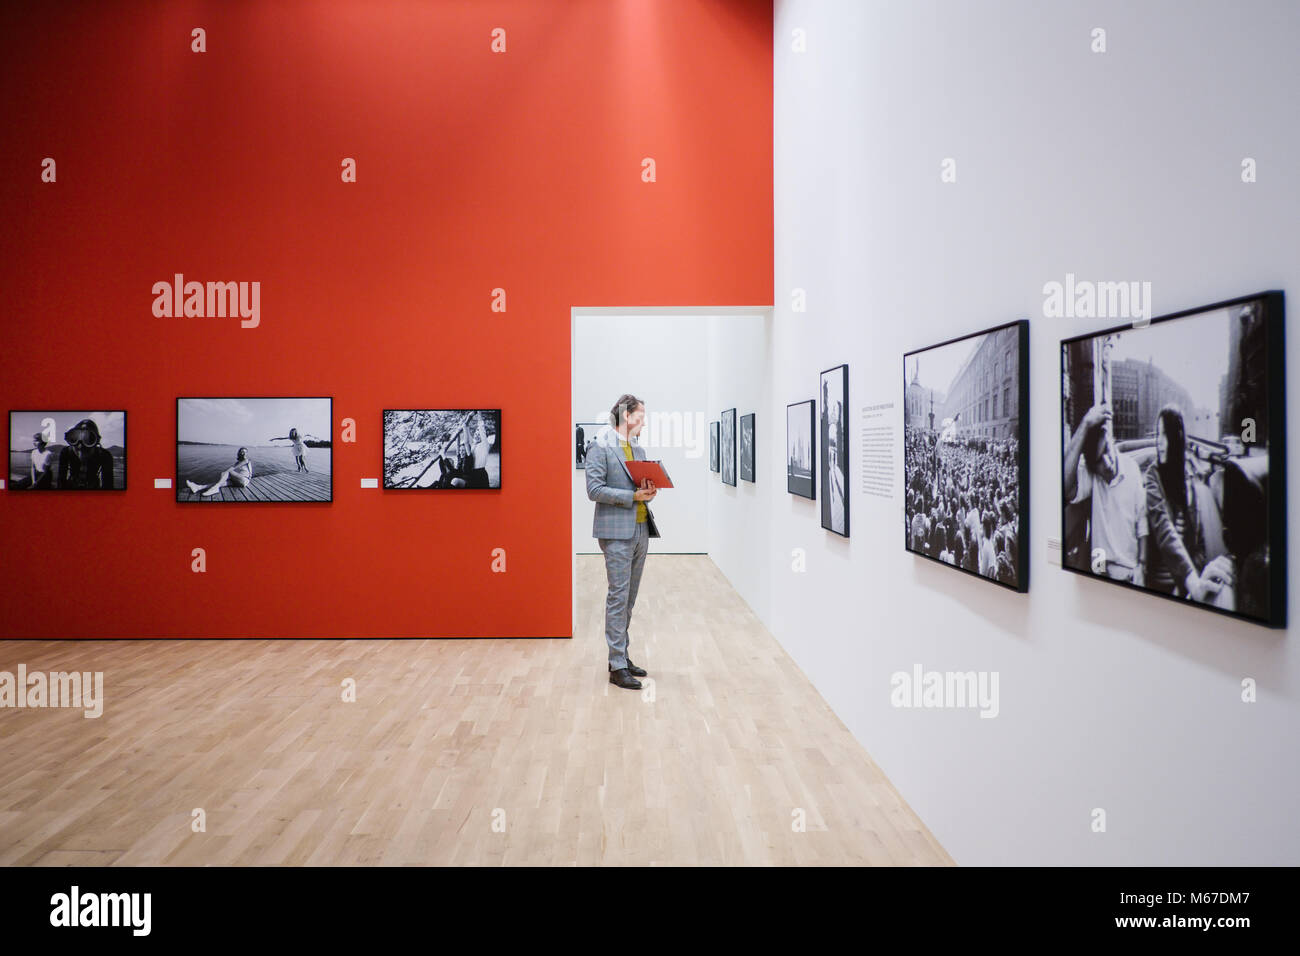 01 March 2018, Germany, Wolfsburg:A visitor standing in the exhibition 'Robert Lebeck 1968'. The art museum is showing a collection of previously unreleased photographs of Lebeck, dealing with the year of upheaval of 1968 in various countries. The exhibition will be running from 04 March to 22 July 2018. Photo: Ole Spata/dpa Stock Photo